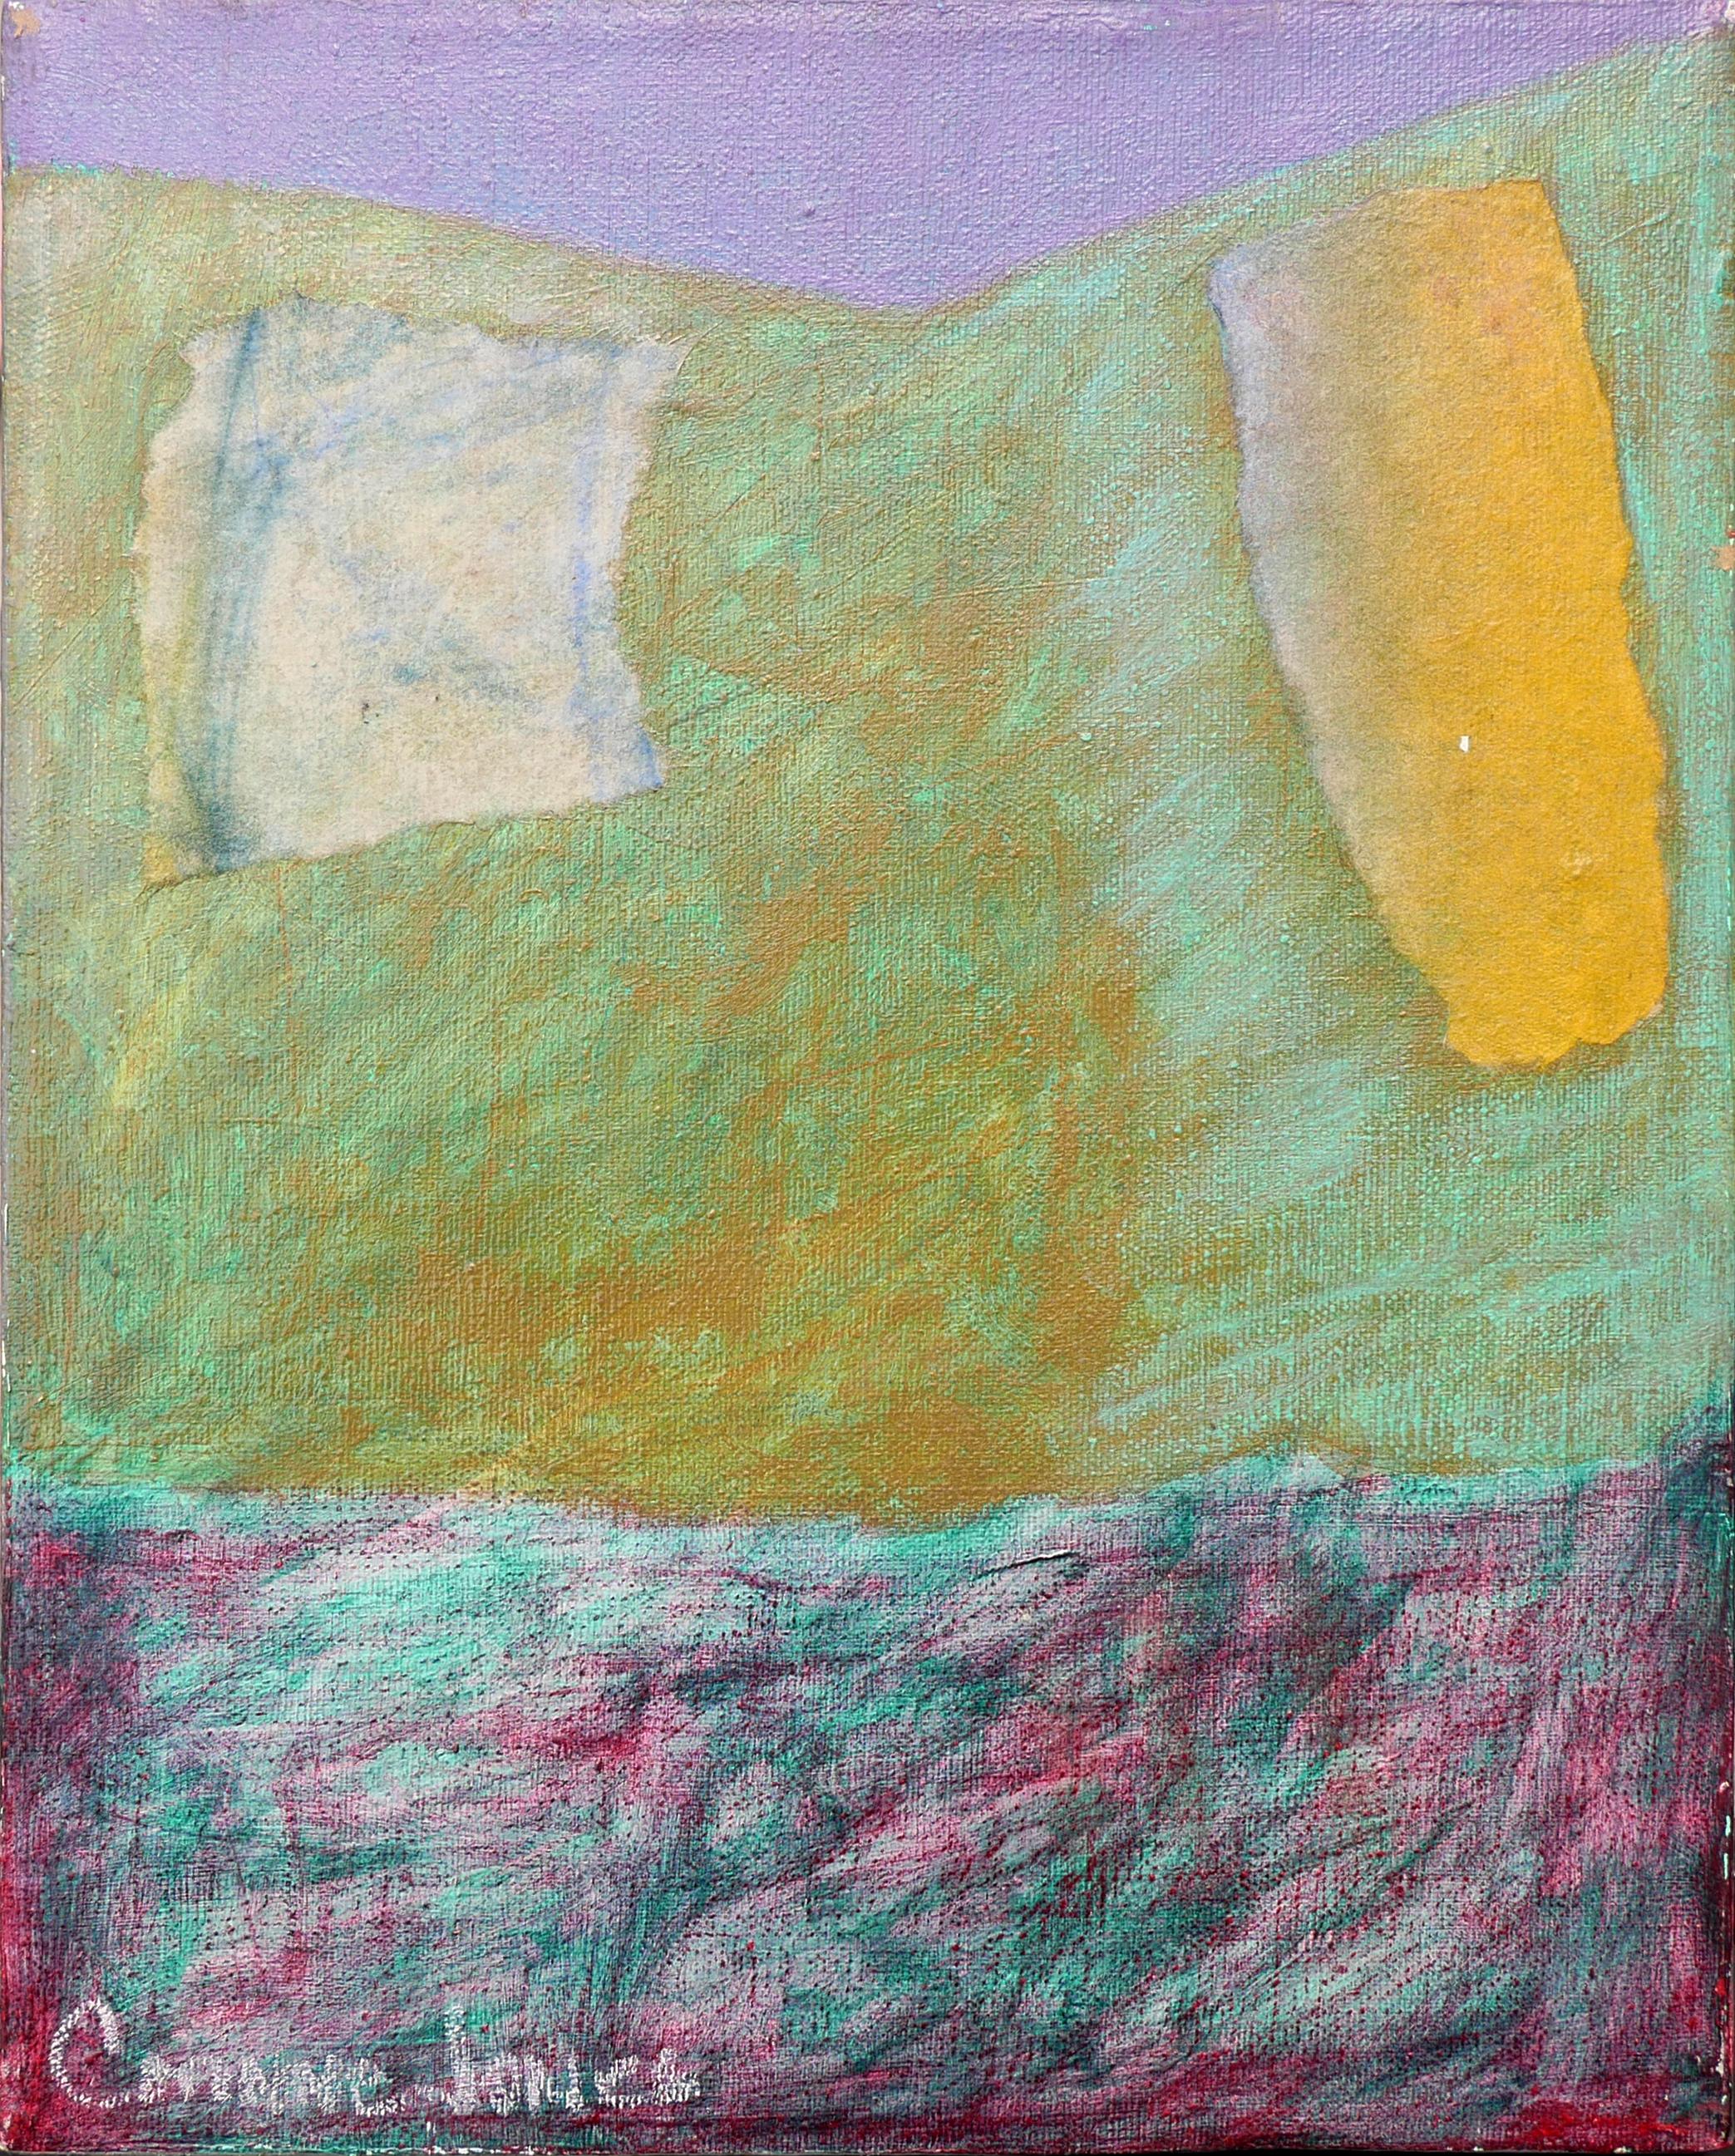 Pastel yellow and lavender abstract geometric painting by artist C. Jones. The painting depicts abstract shapes in the forefront against a green and orange background. Below is a dark pink, black, and teal color field done through expressionist